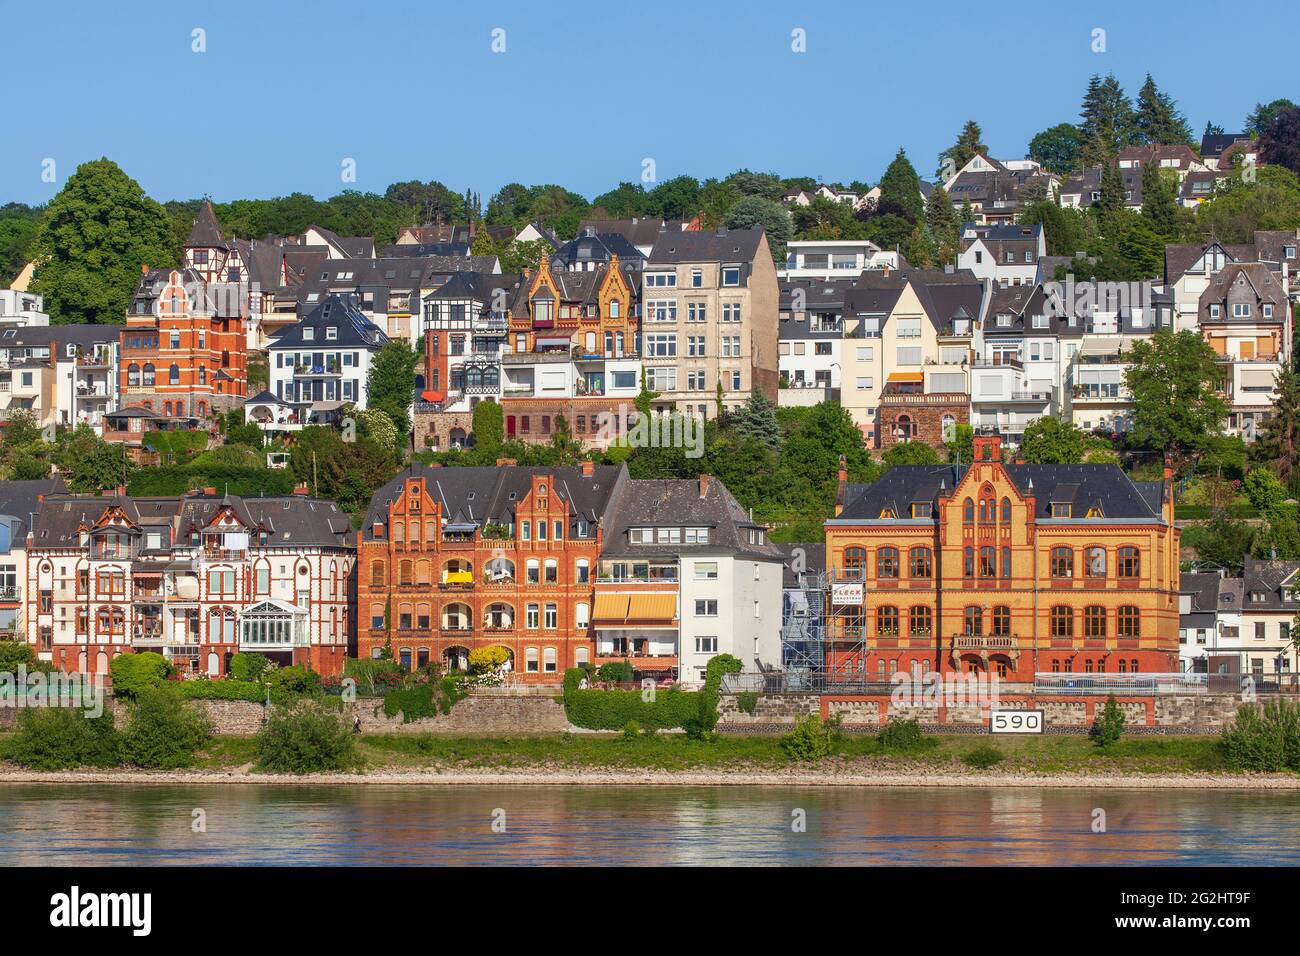 Residential buildings in the Pfaffendorf district, Koblenz, Rhineland-Palatinate, Germany, Europe Stock Photo